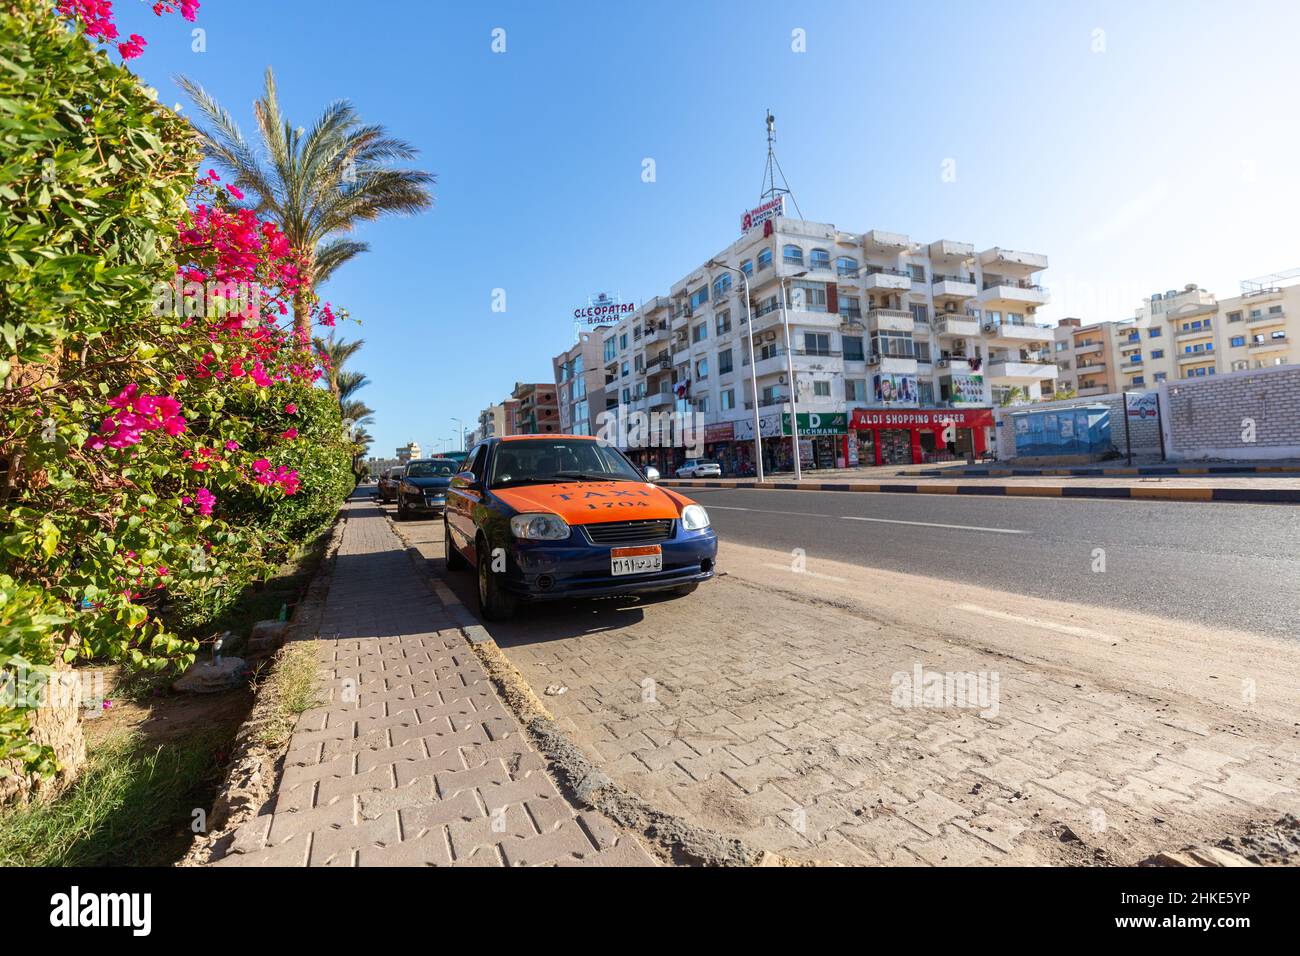 Hurghada, Egypt - January 22, 2022: Taxi cab stands on a street in Hurghada, Egypt. Stock Photo